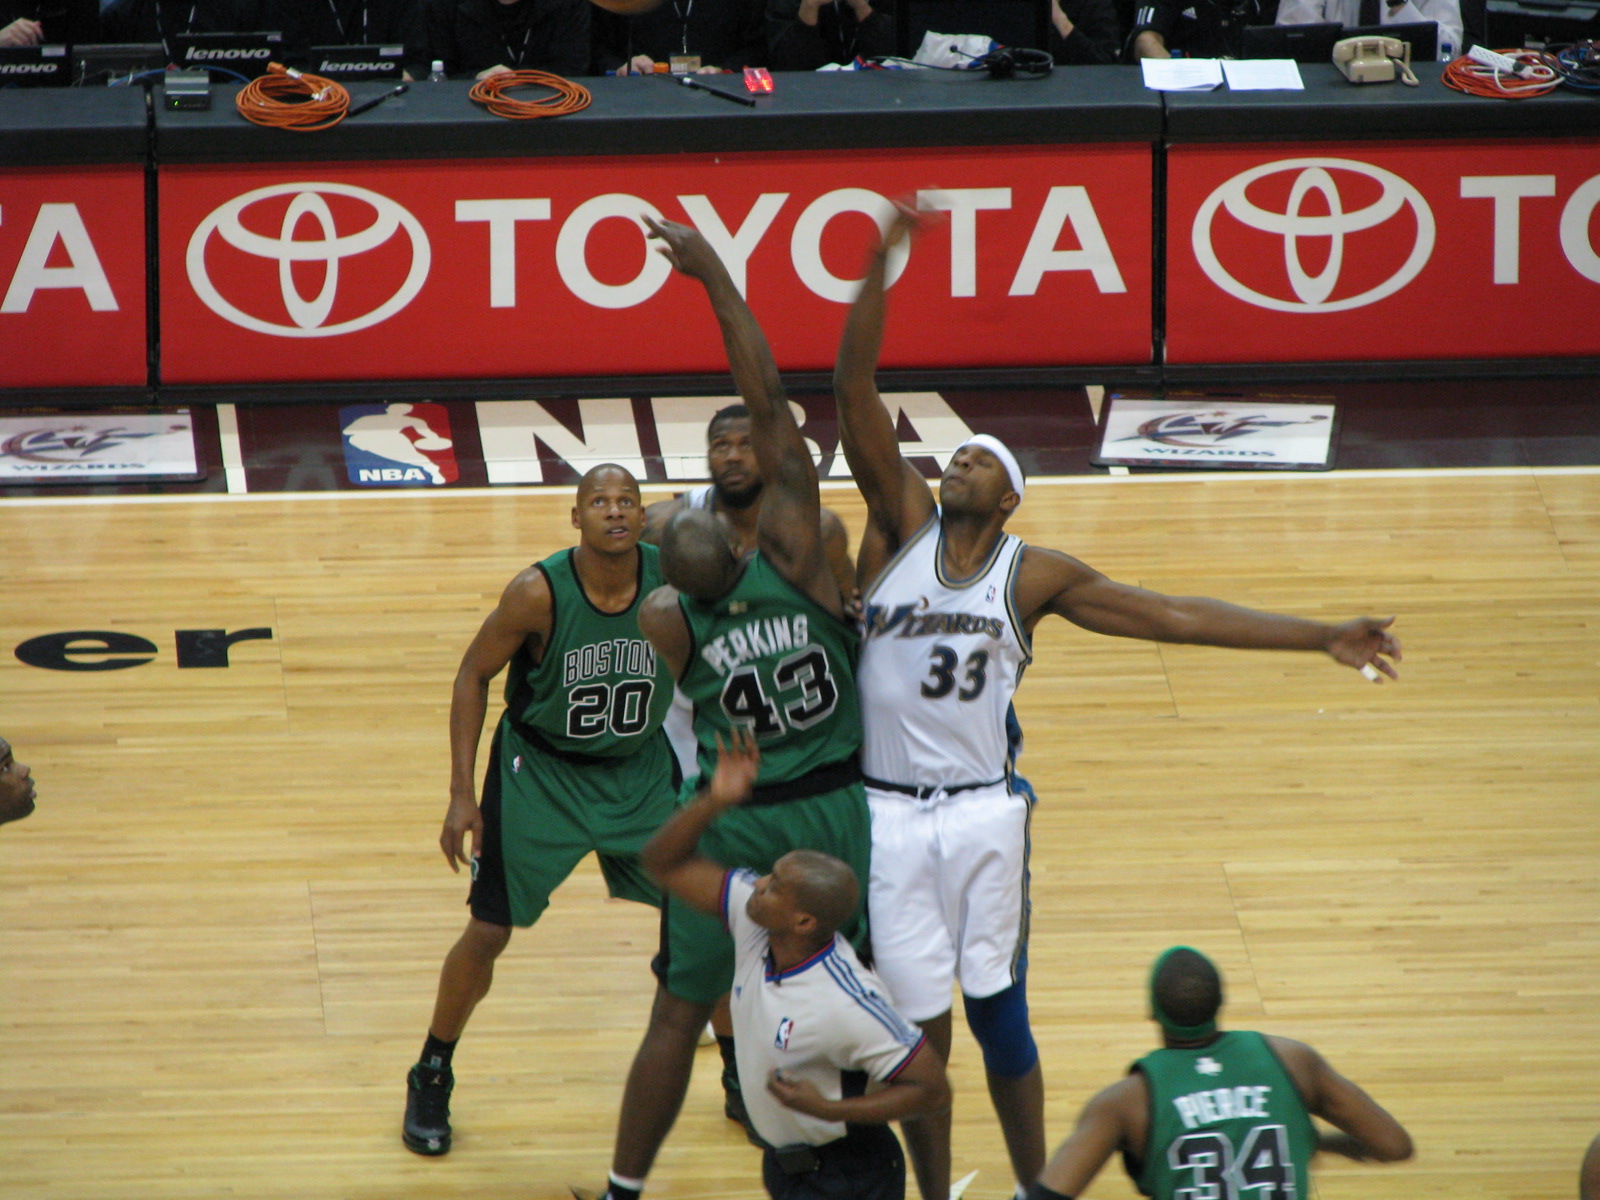 basketball players compete in the middle of a ball game